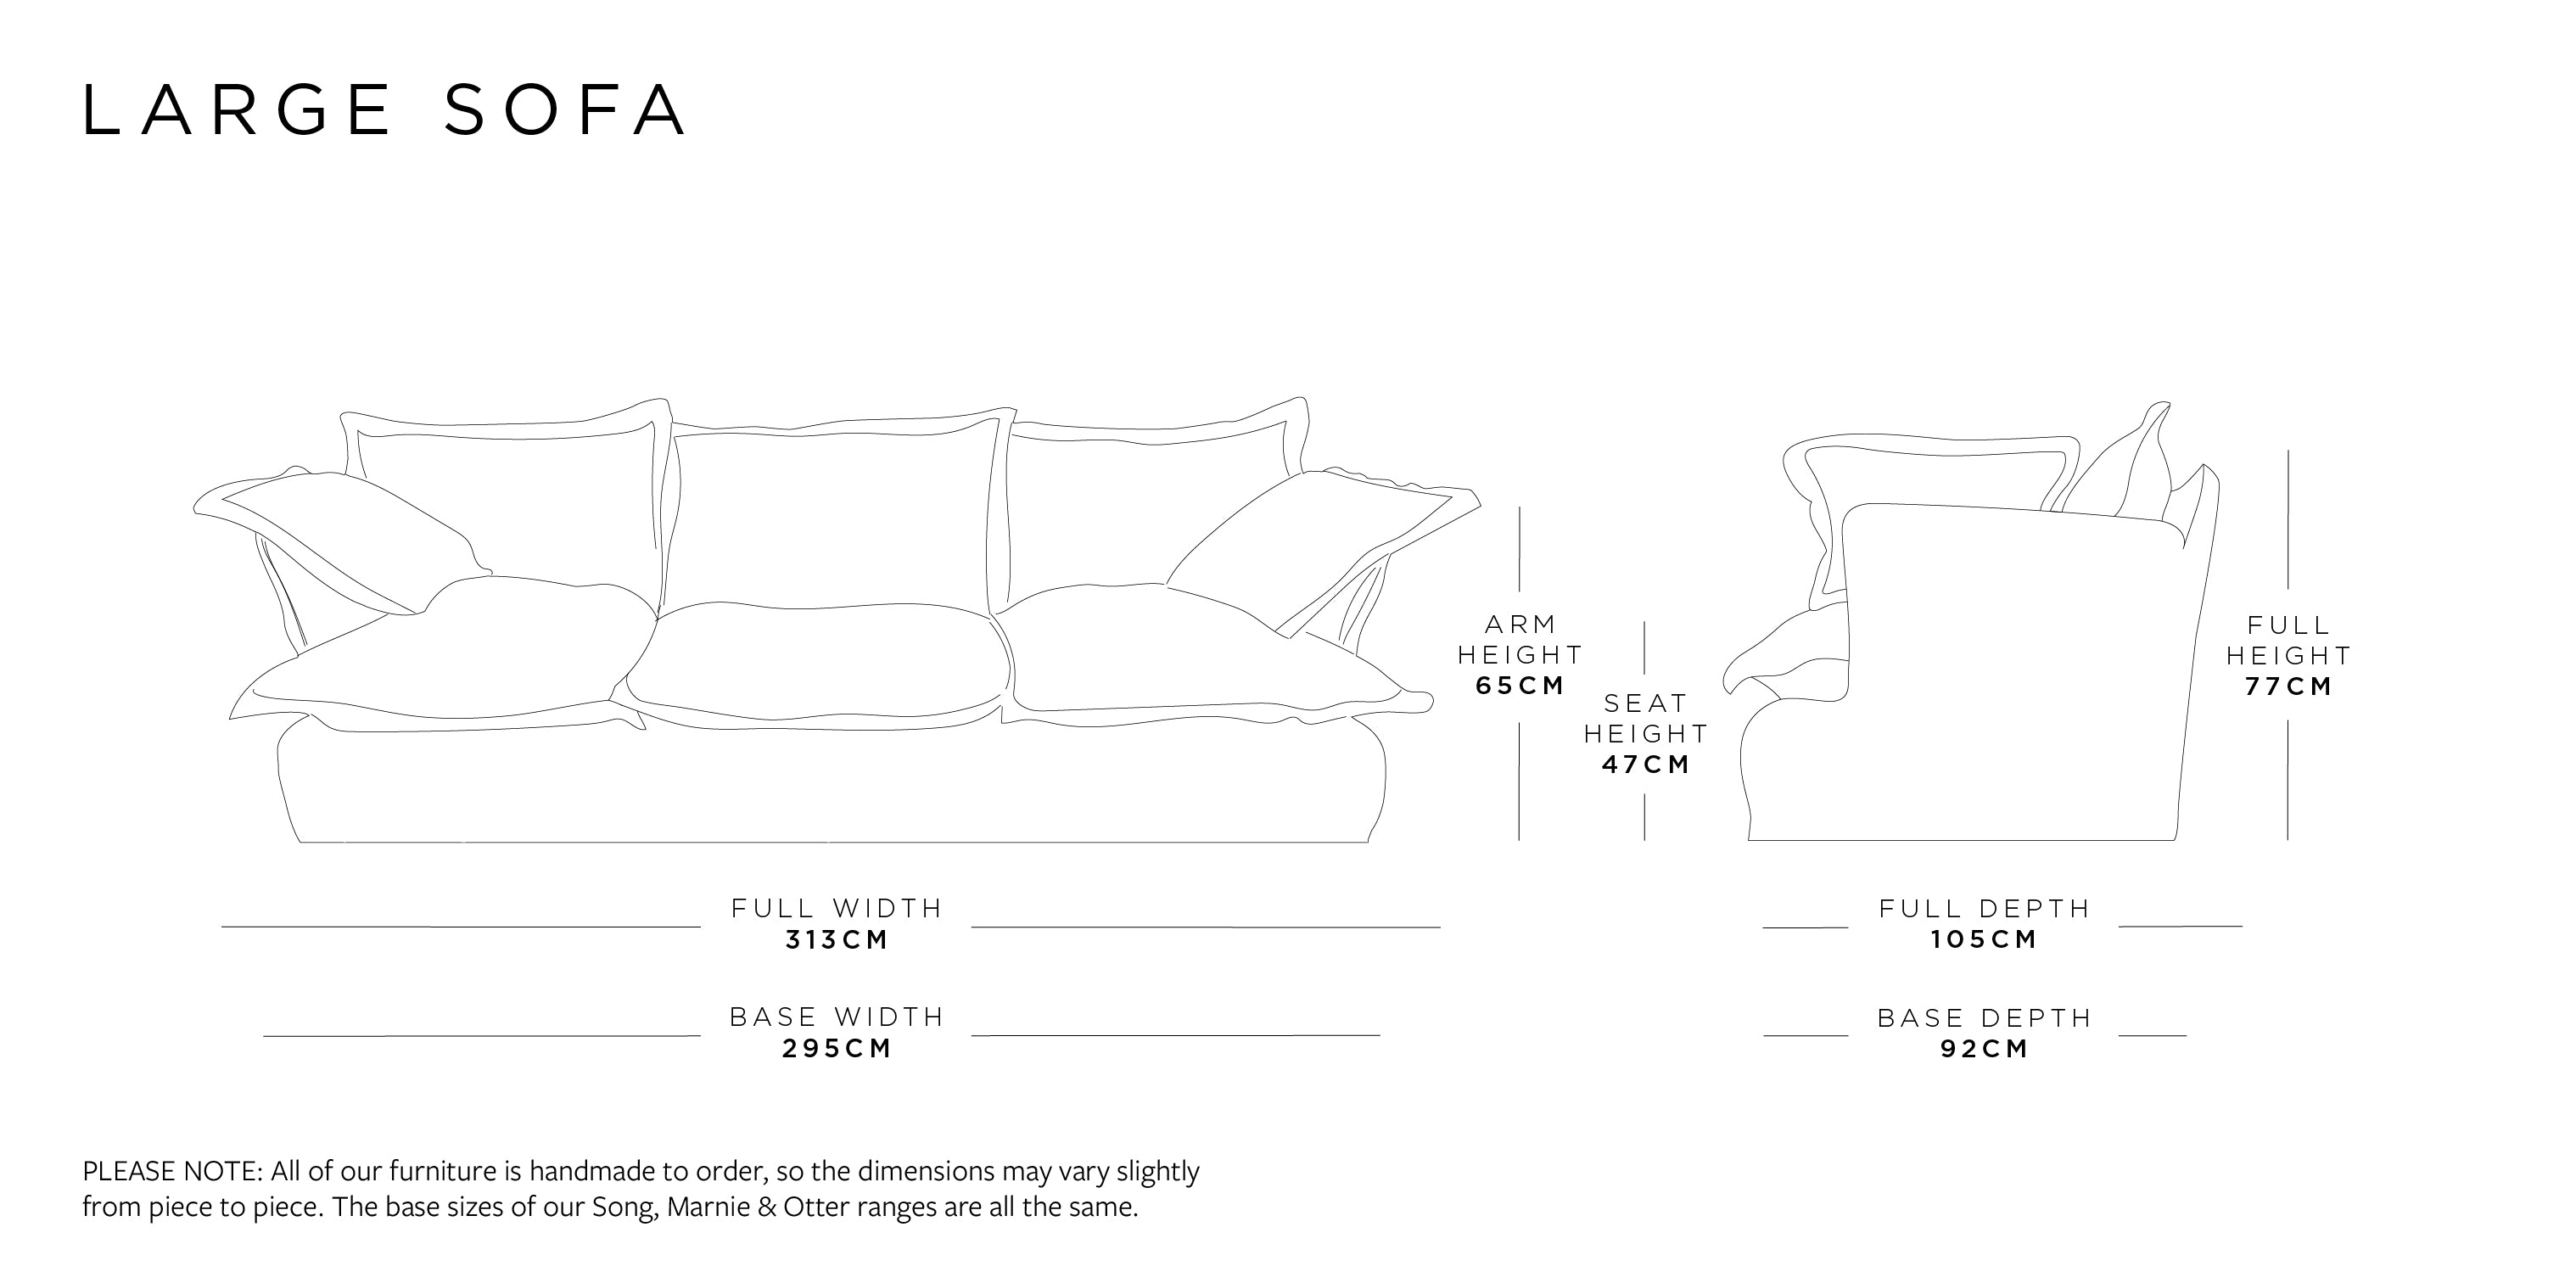 Large Sofa | Song Range Size Guide